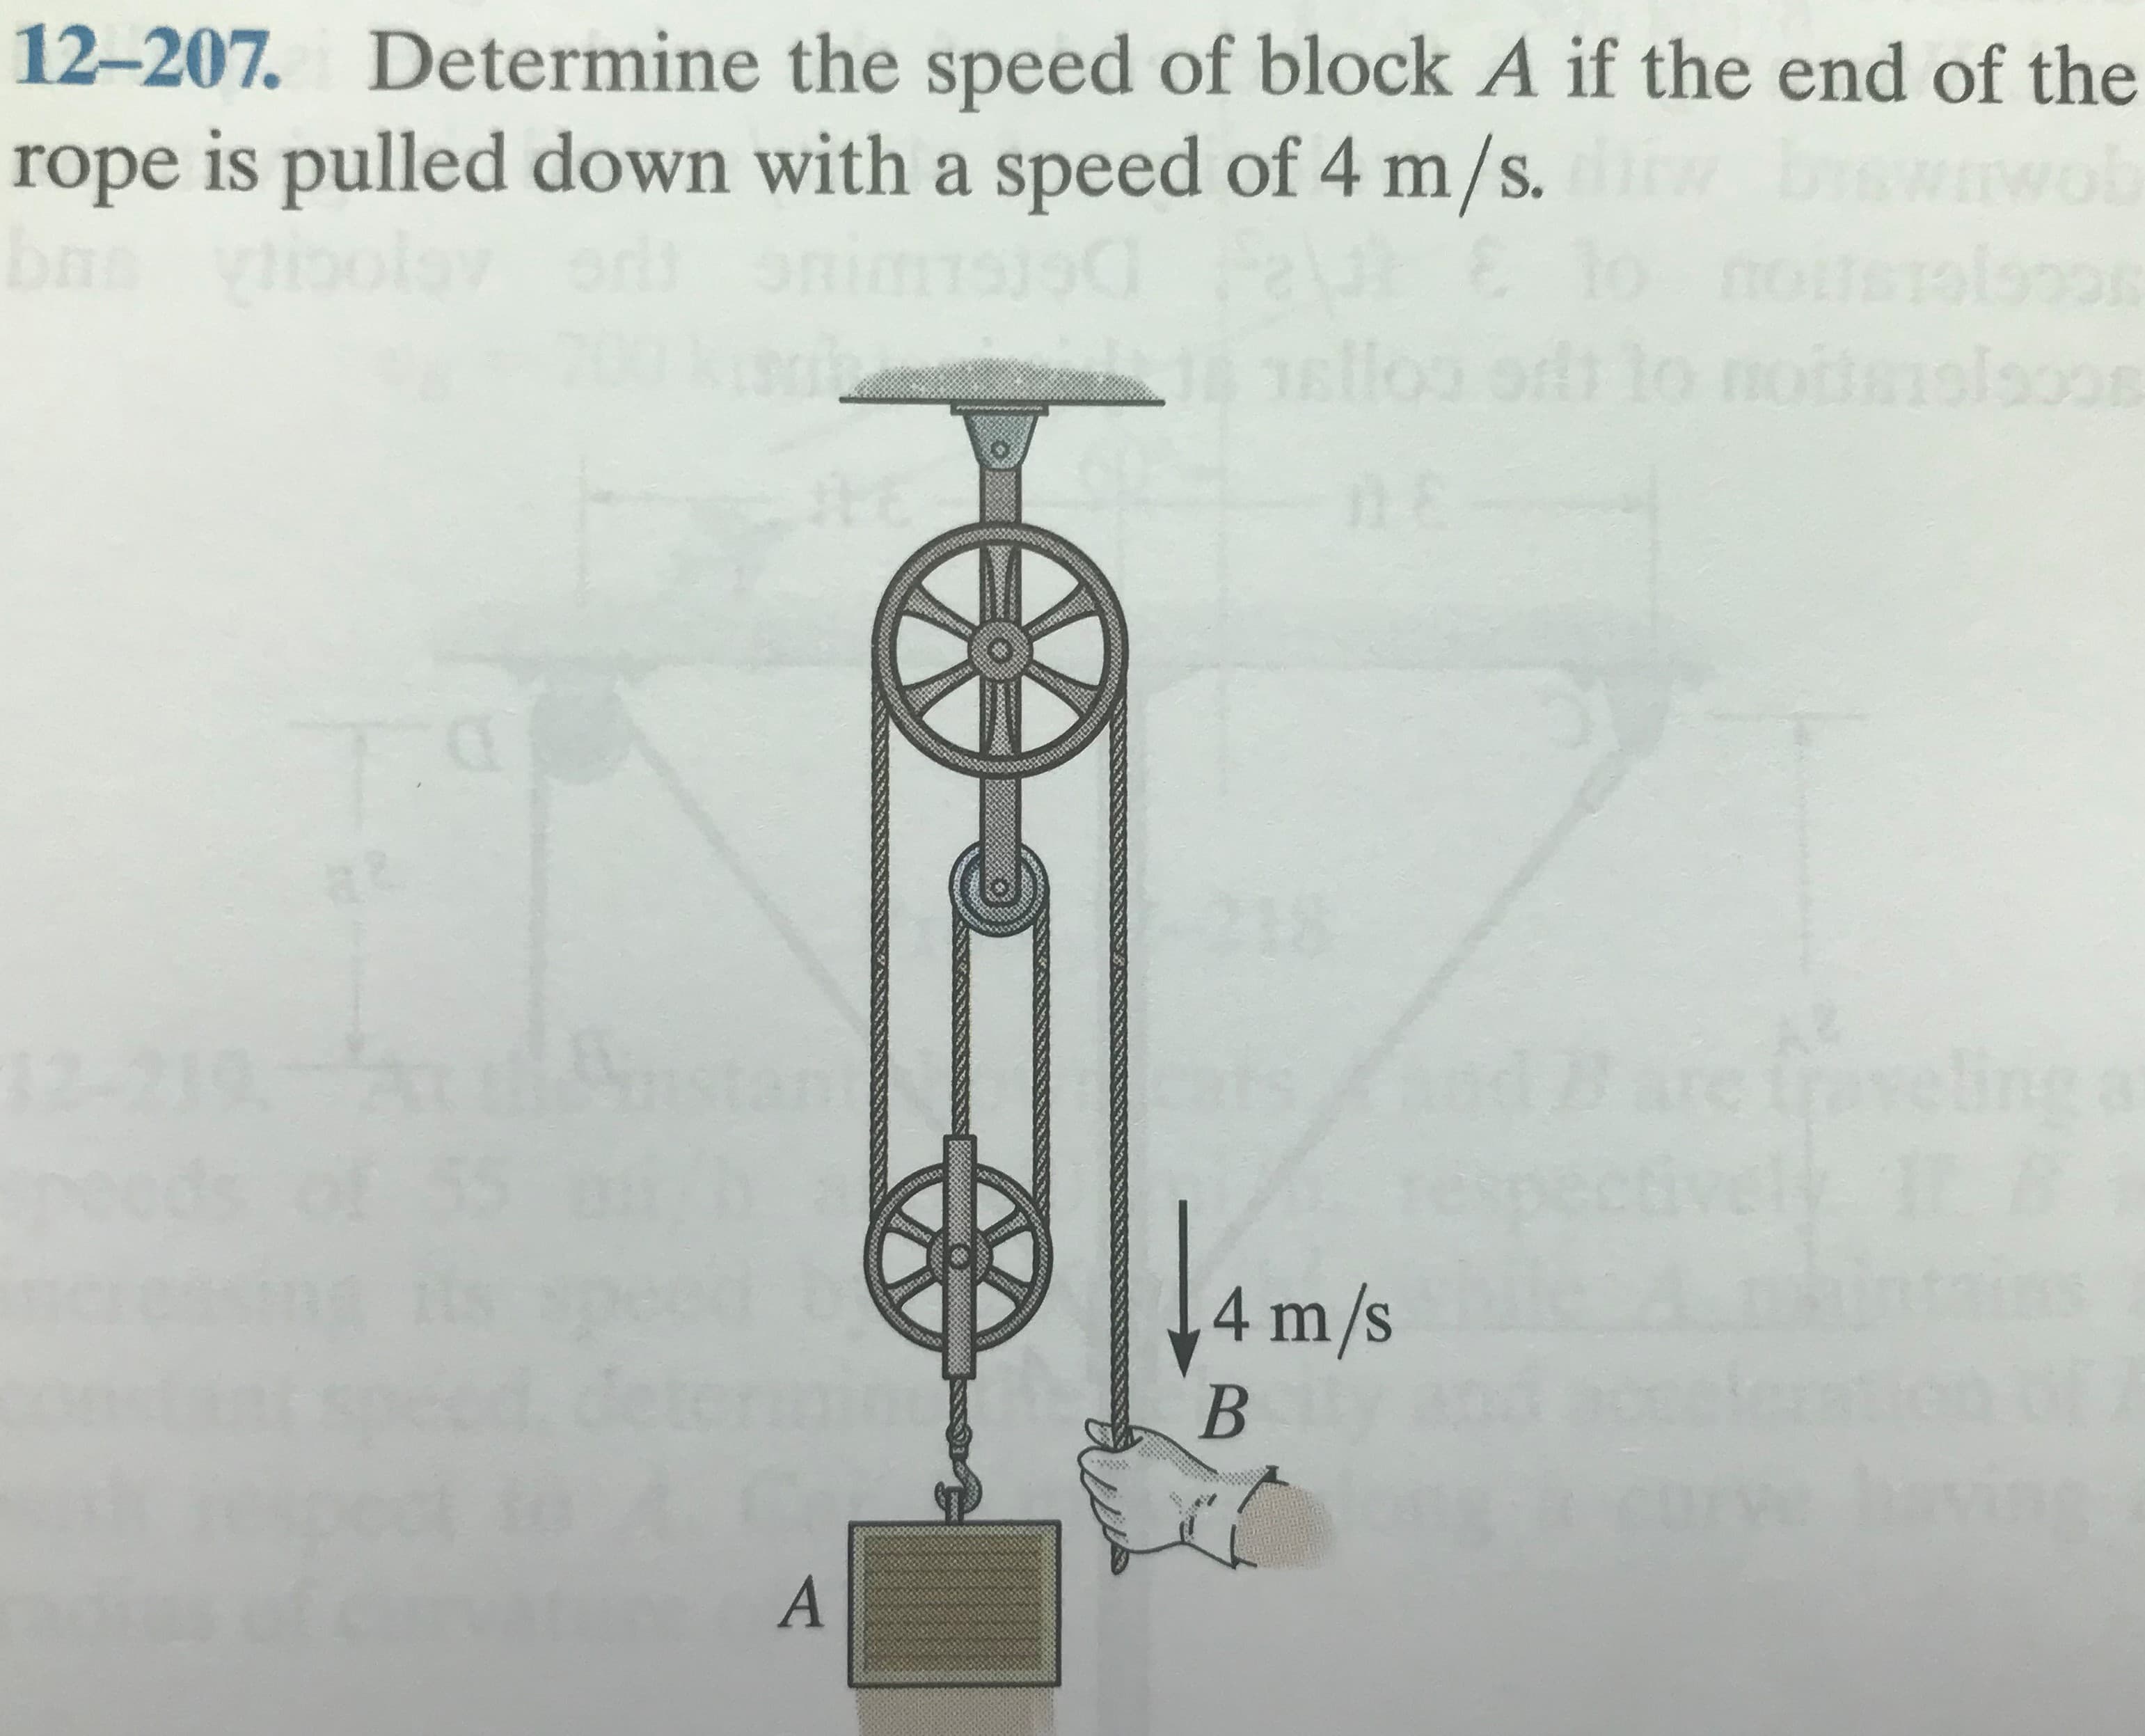 12-207. Determine the speed of block A if the end of the
rope is pulled down with a speed of 4 m/s.
bas vioolsy ods
by
elloo ort lo nottmolsoos
218
12-
fraveling a
fompo
4 m/s
